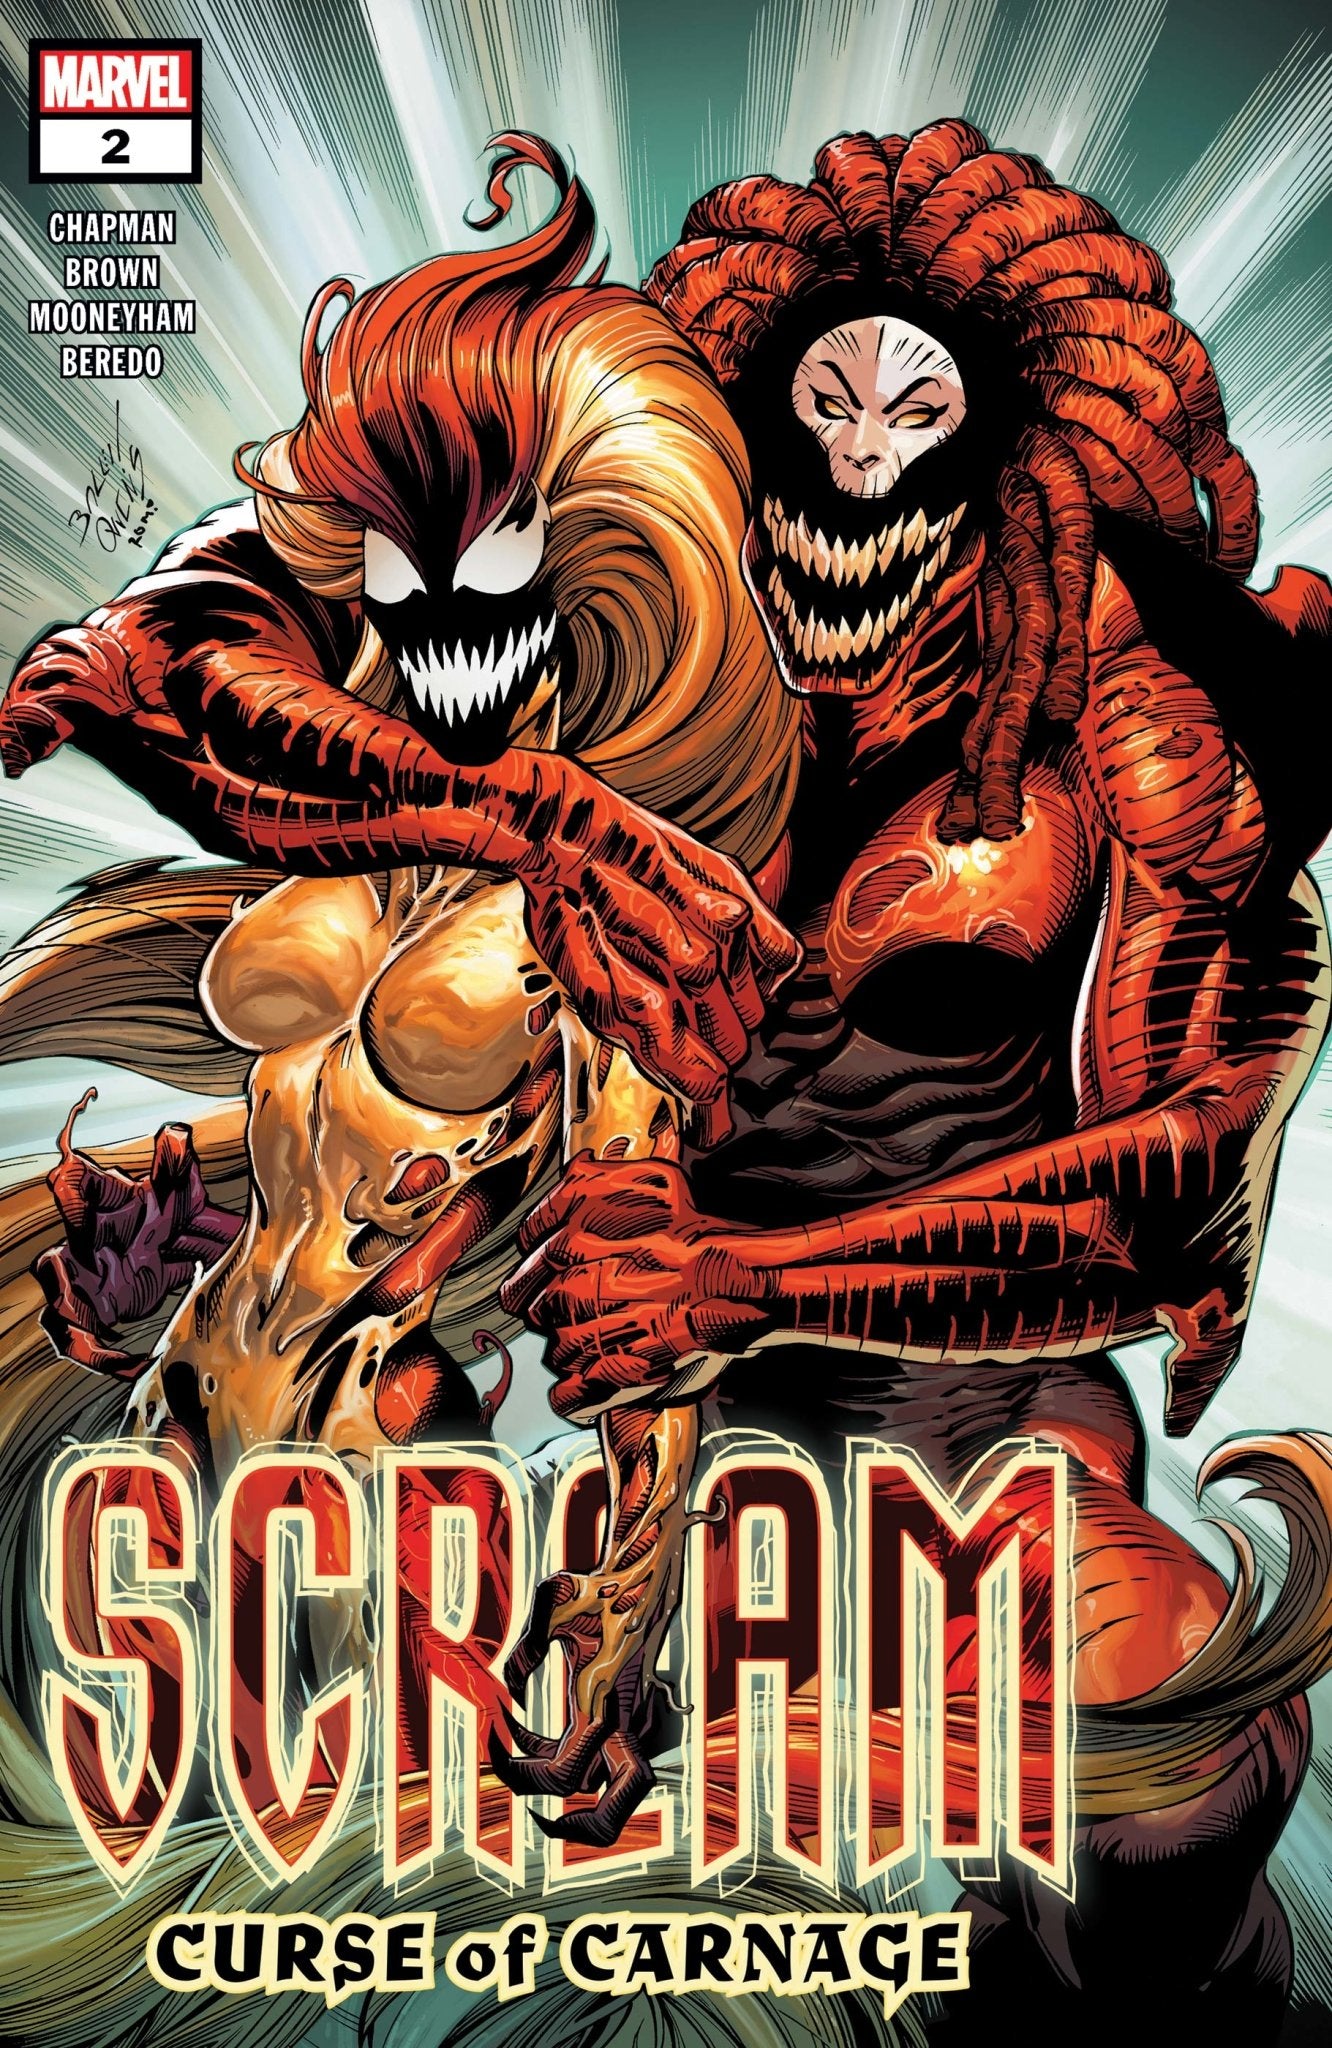 SCREAM : CURSE OF CARNAGE #2 - The Comic Construct